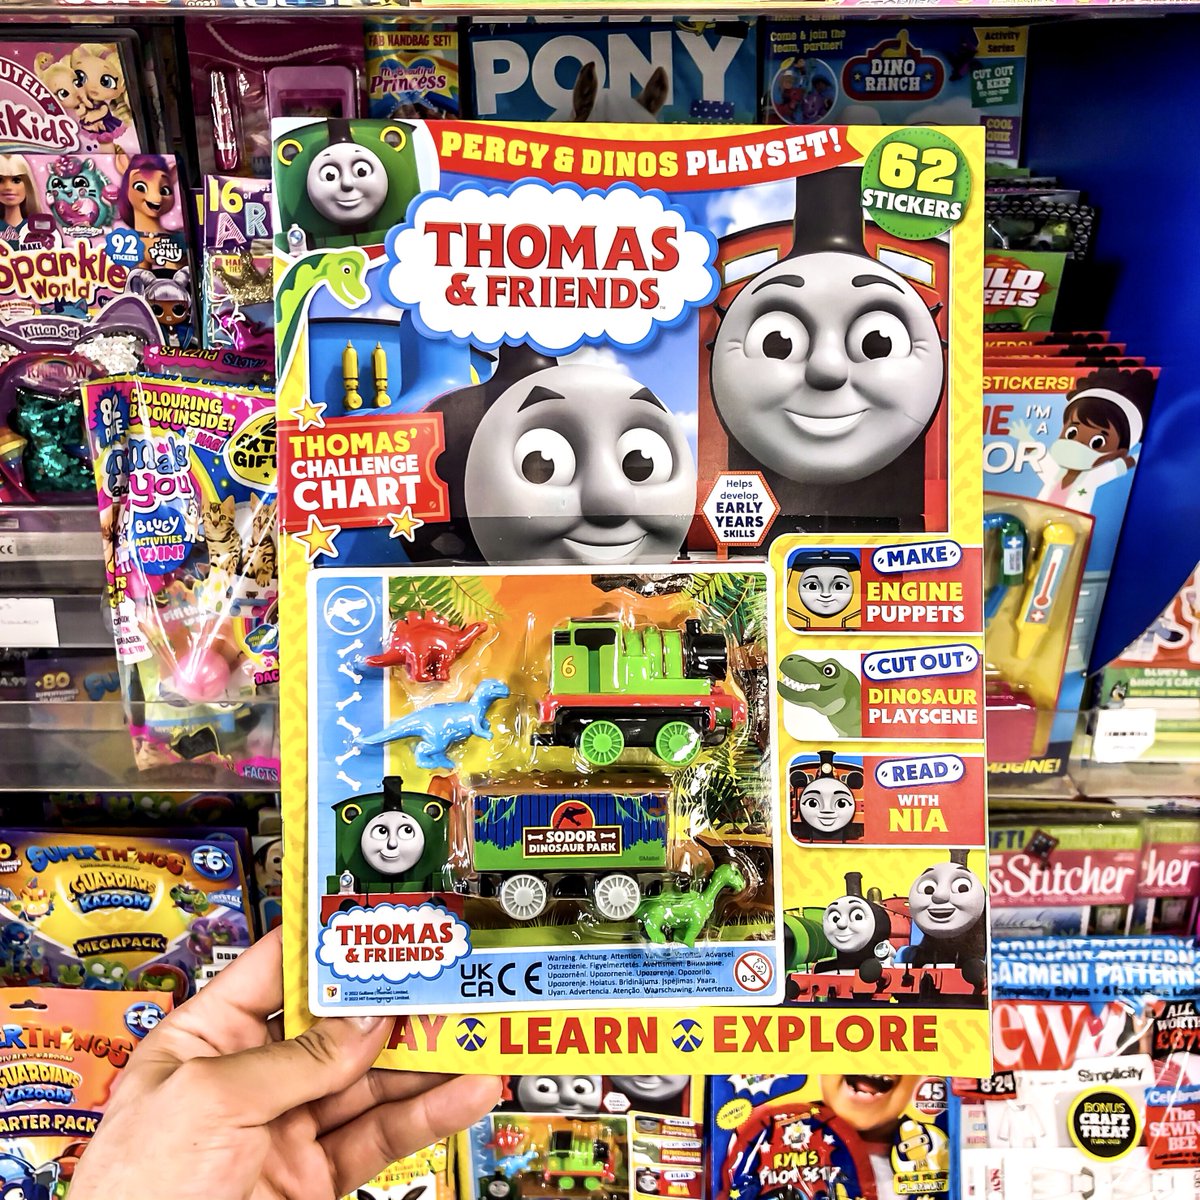 Percy has gone jurassic for the latest issue of Thomas & Friends magazine out today. Inside includes stickers, two Nia stories and activities to doodle along with a couple of posters. 

#thomasandfriends #thomasparent #thomasthetrain #thomasthetankengine #sussex #bluebellrailway